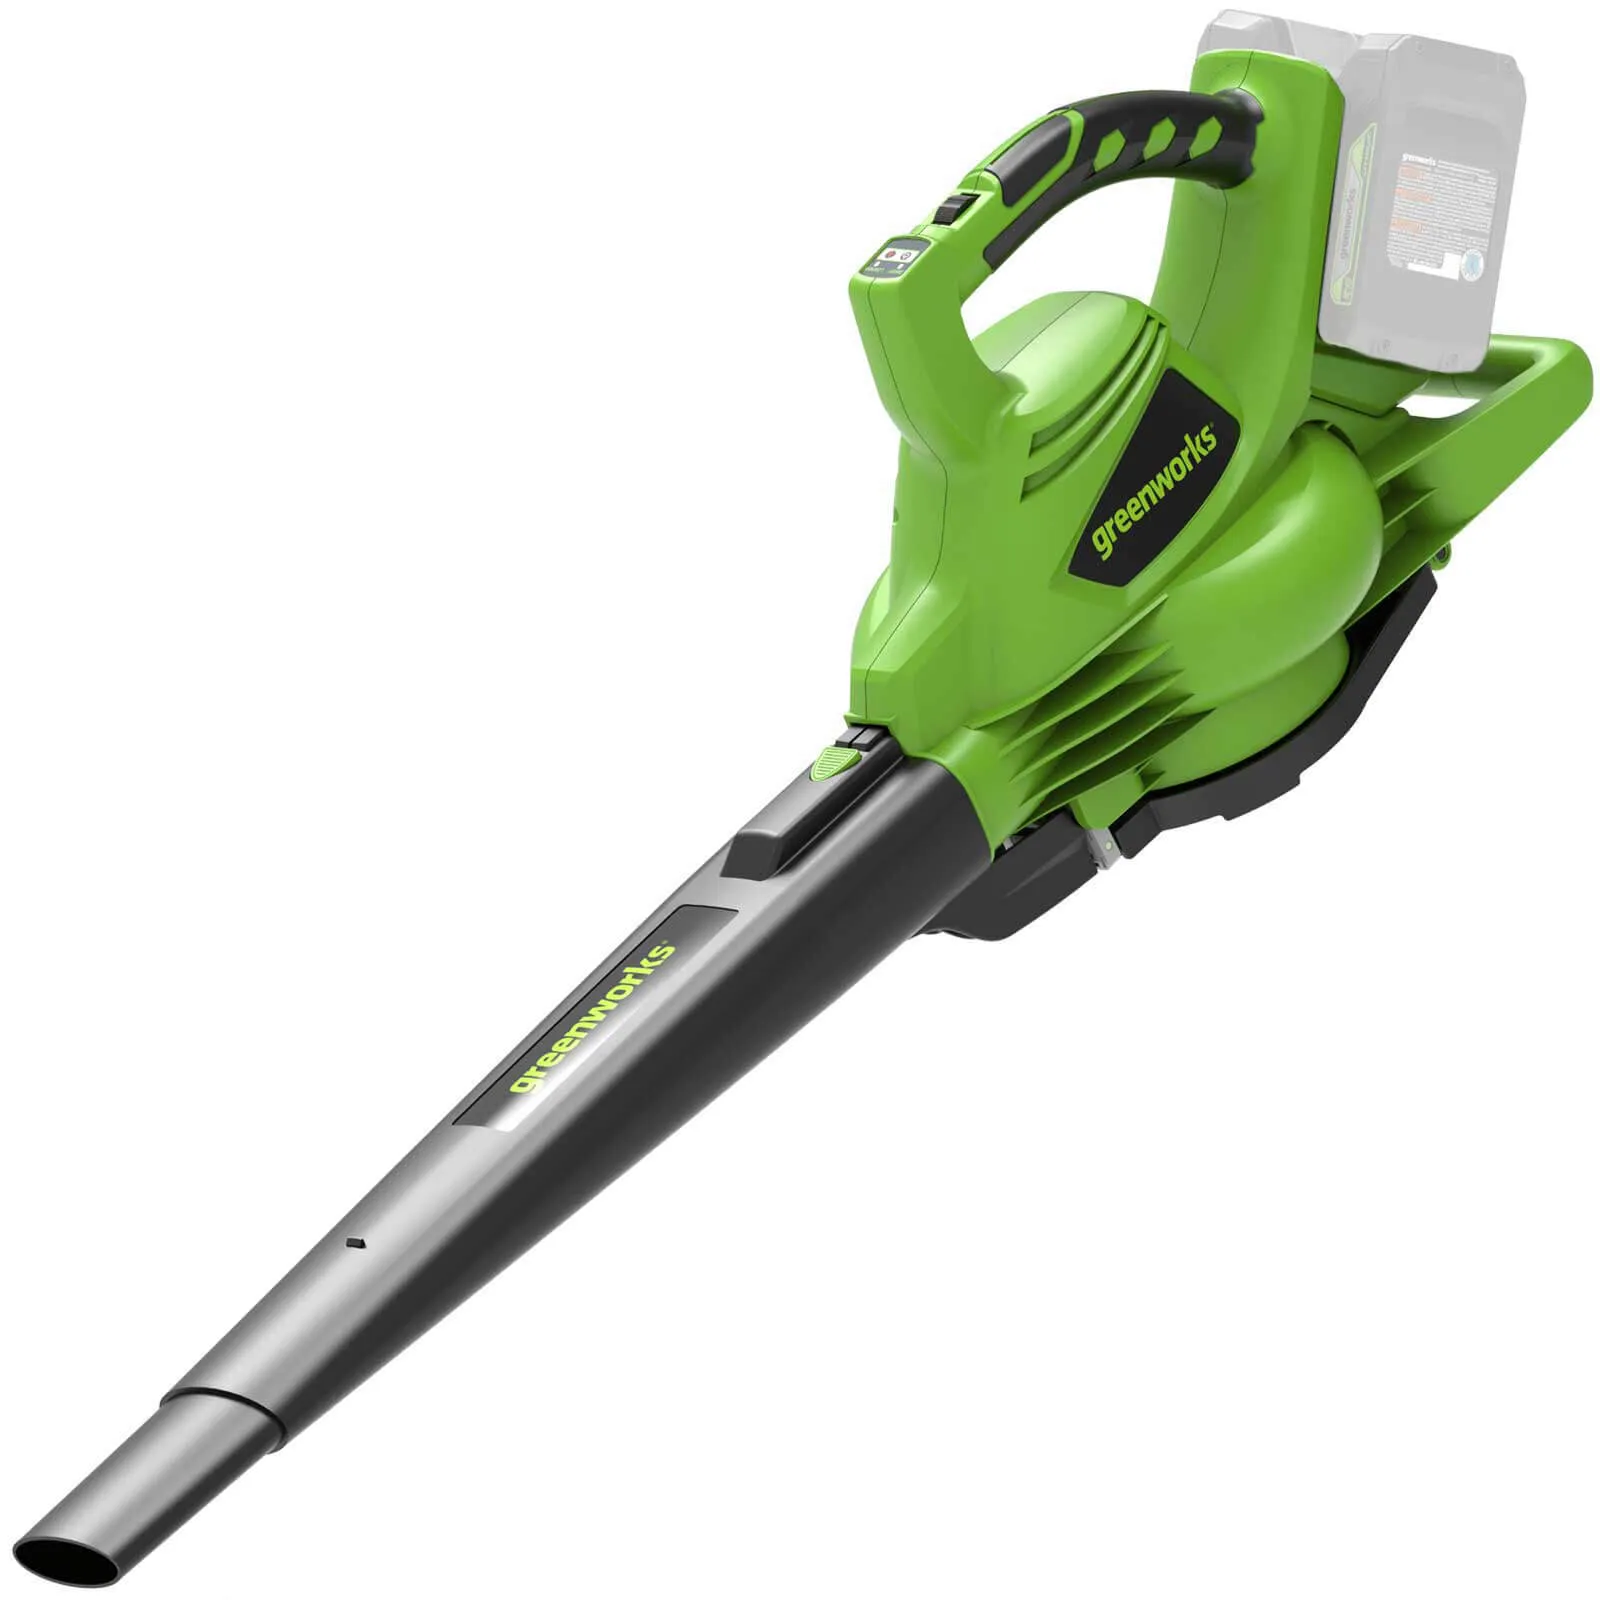 Greenworks GD24X2BV 48v Cordless Leaf Blower and Vacuum (Uses 2 x 24v) - No Batteries, No Charger